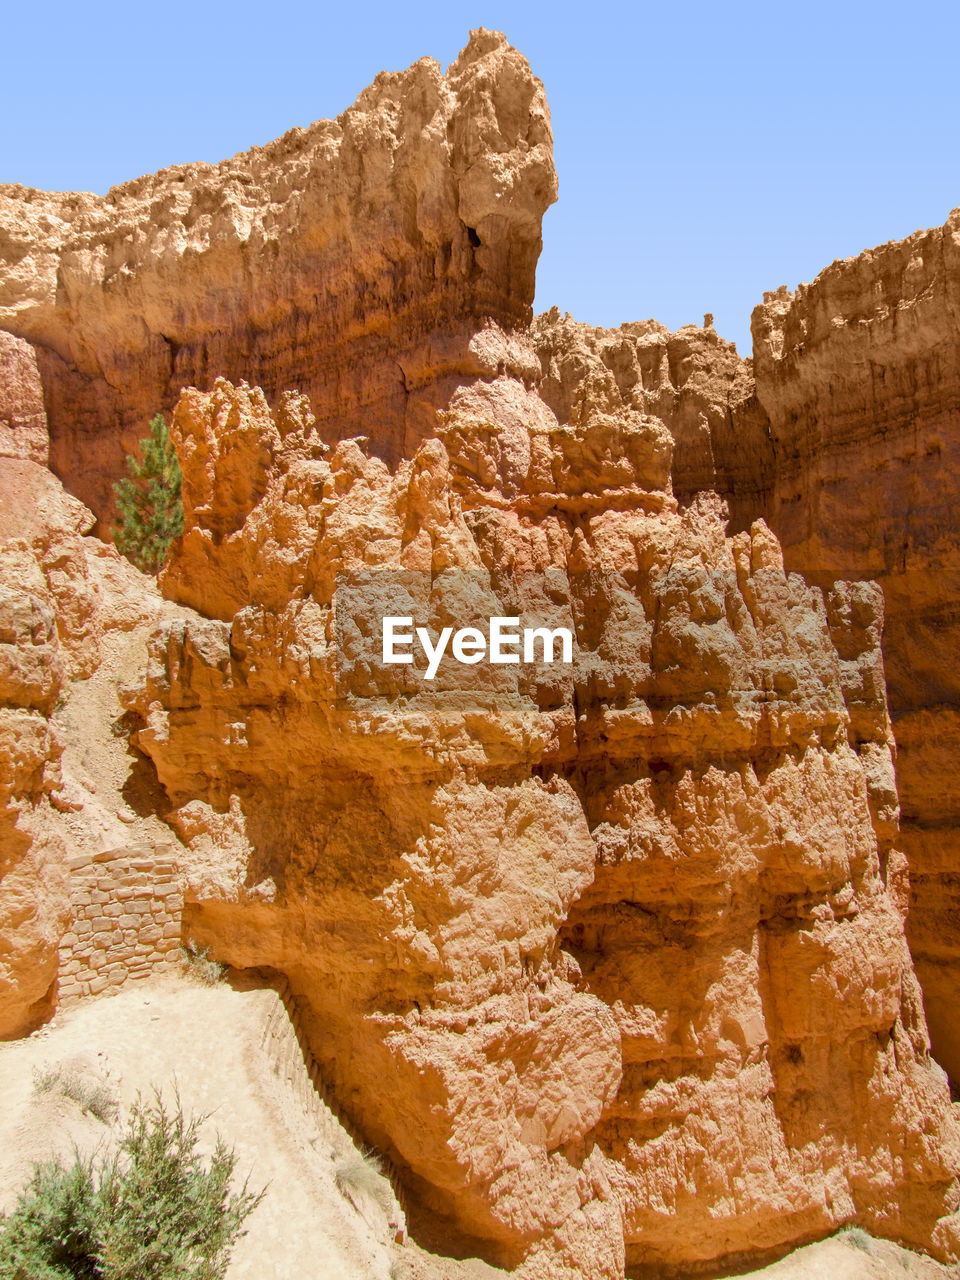 ROCK FORMATIONS IN A CANYON